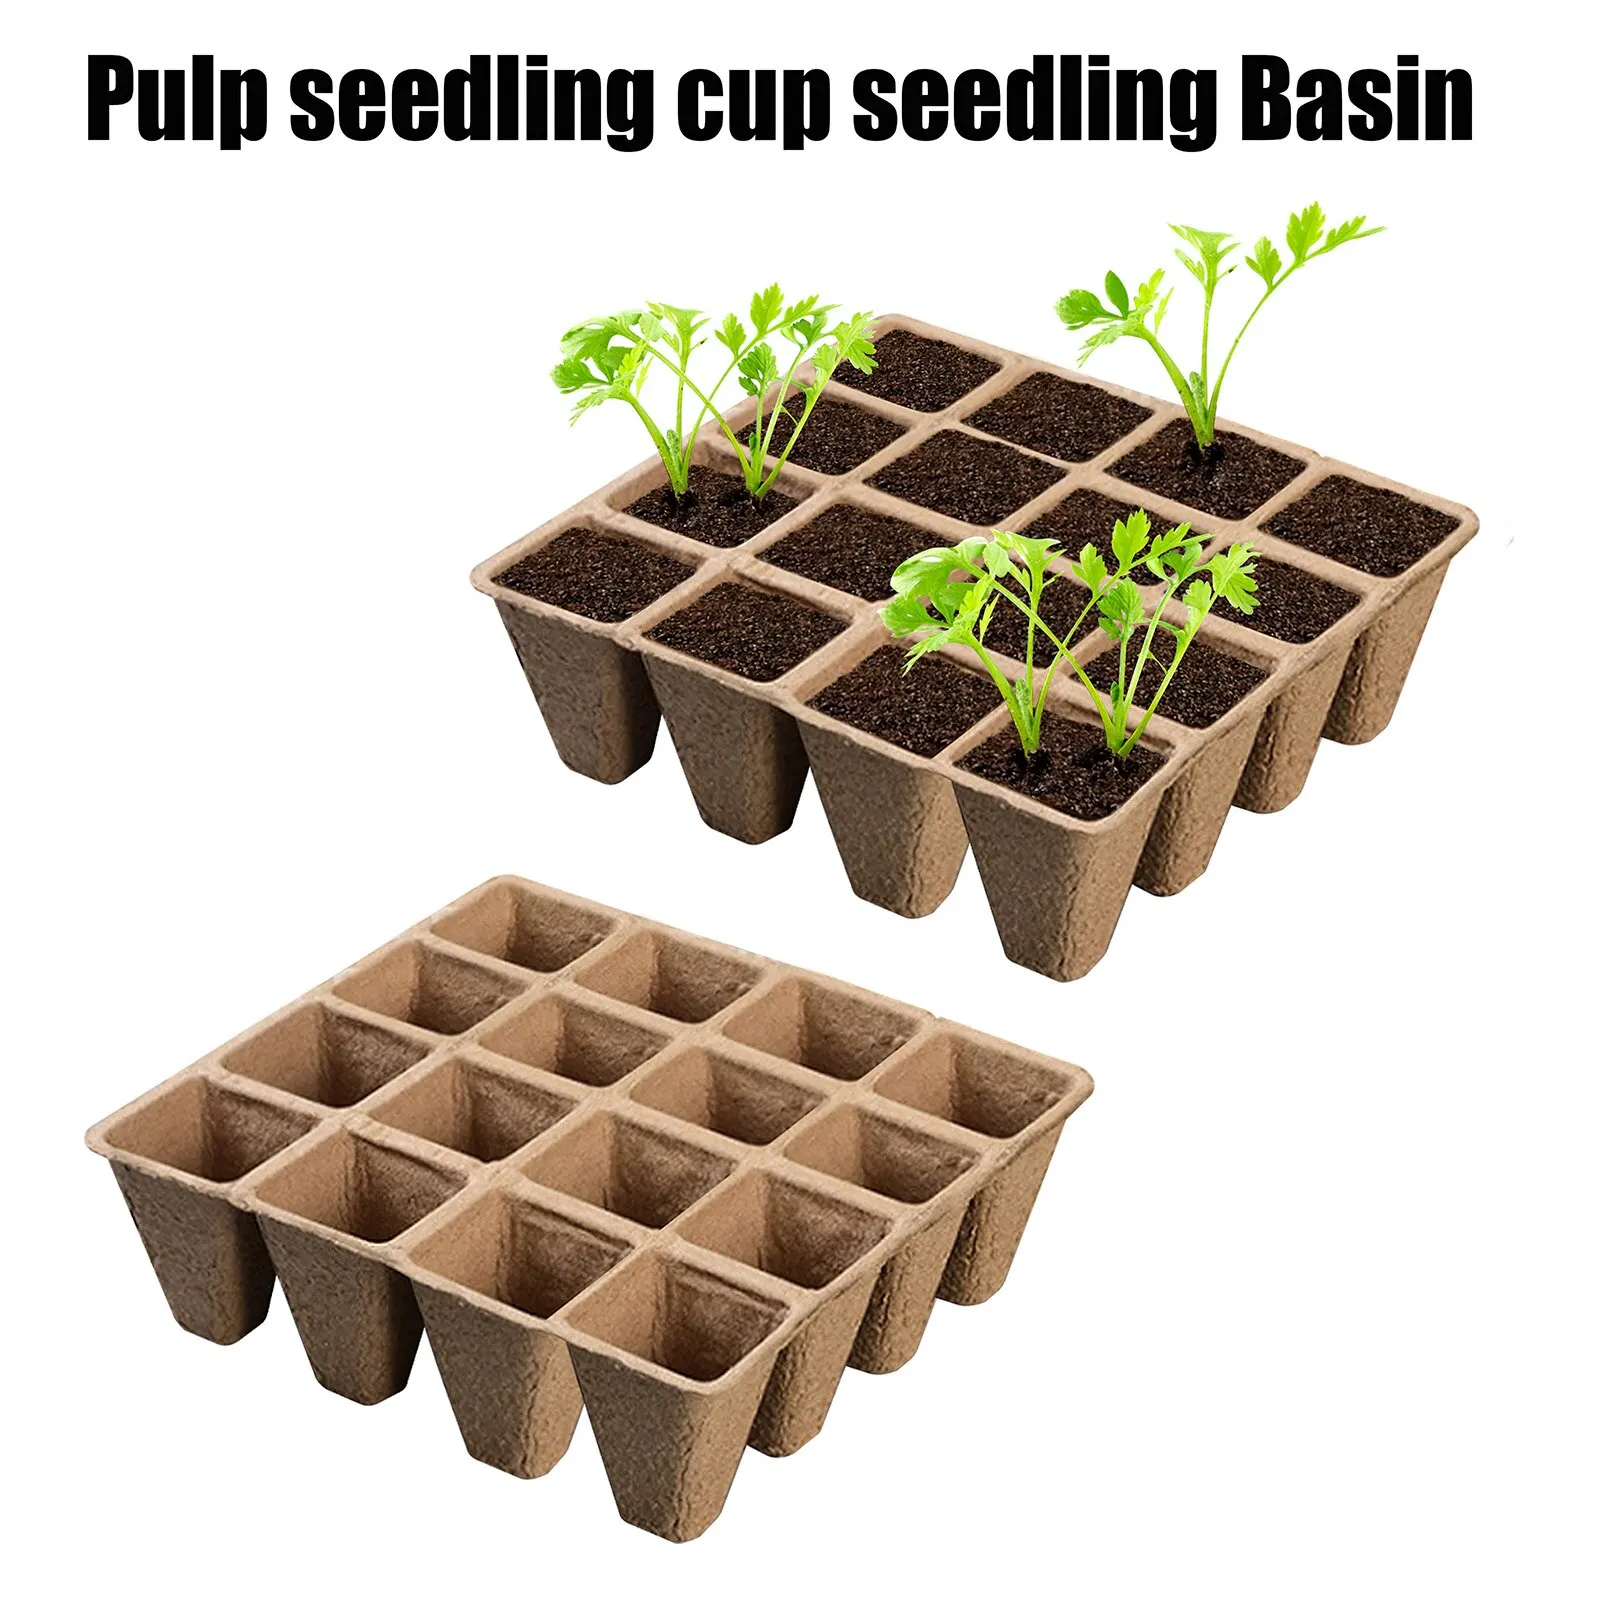 

16-Grid Seedling Germination Tray Biodegradable Planter Nursery Pots Garden Seed Tray Starting Trays for Seedling Plant Seed 8PC